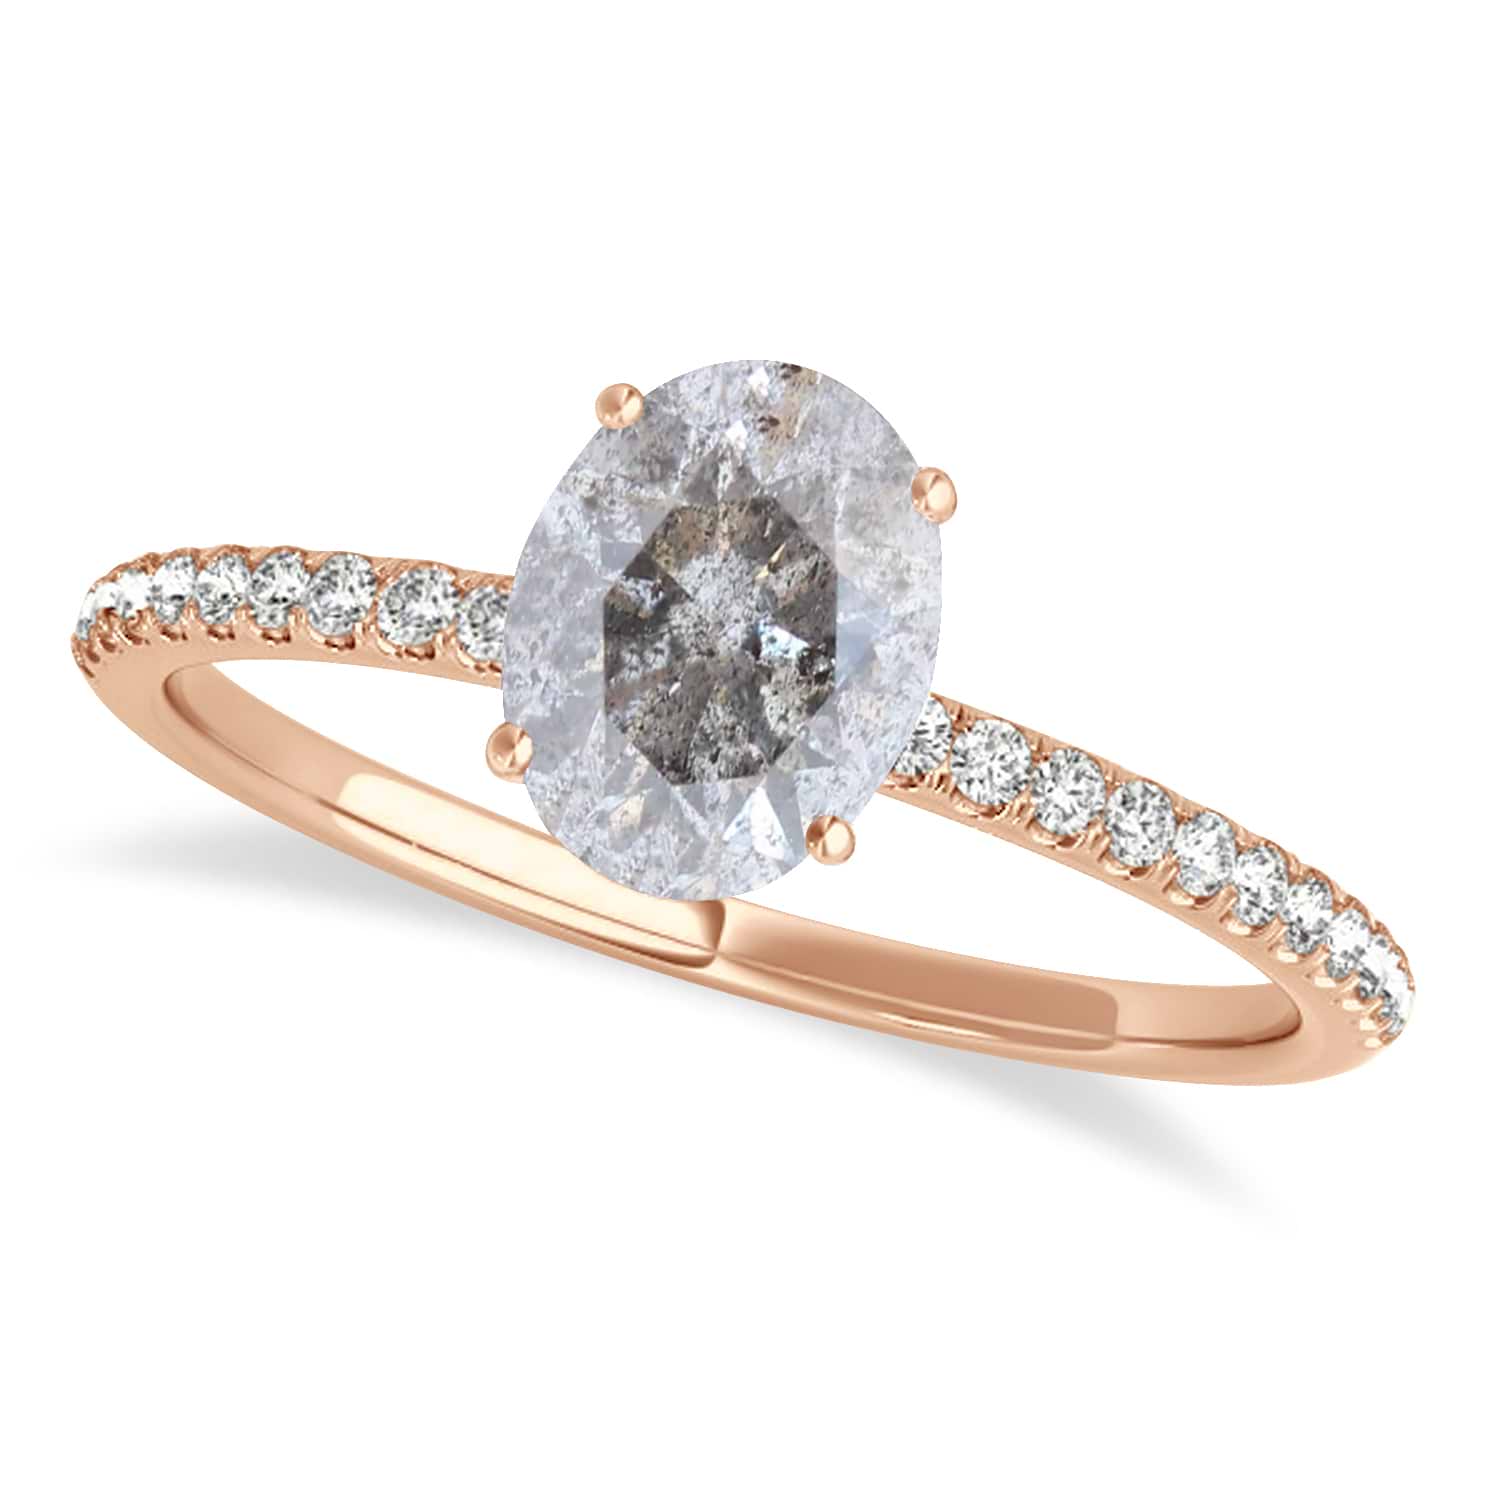 Oval Salt & Pepper Diamond Accented  Engagement Ring 14k Rose Gold (1.50ct)